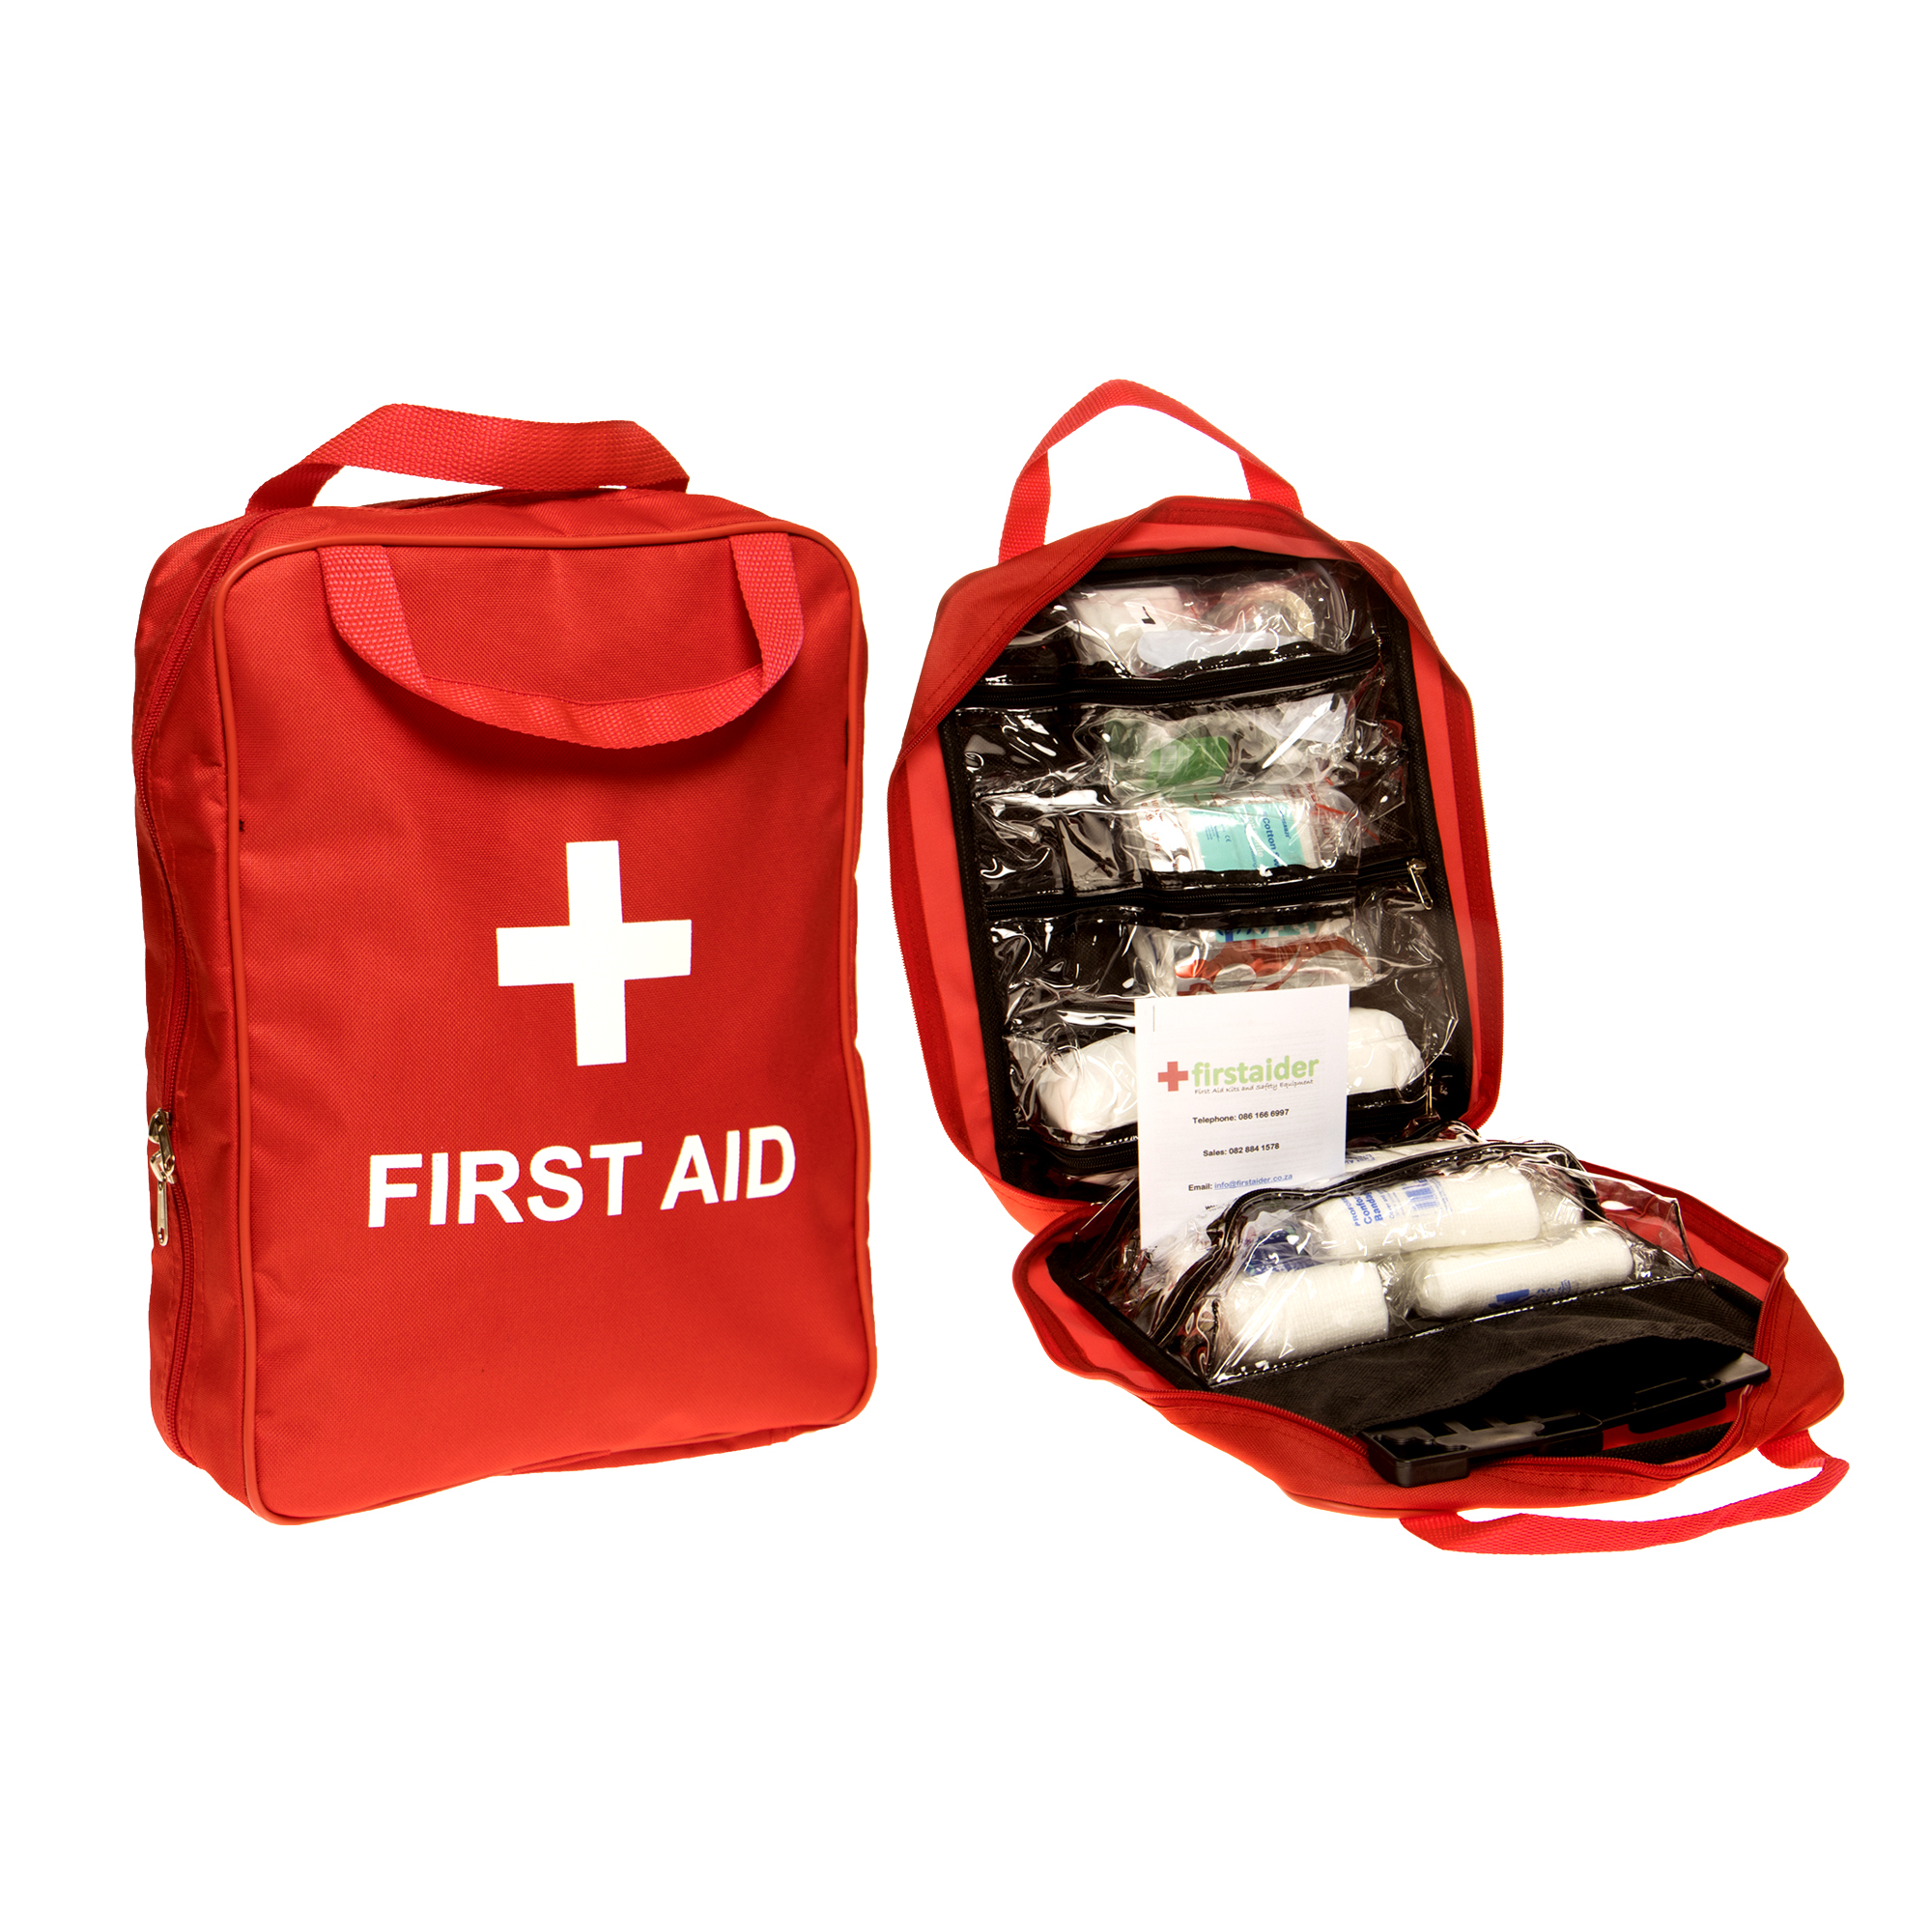 Regulation 3 First Aid Kit in Grab Bag (5-50 Persons) by Firstaider